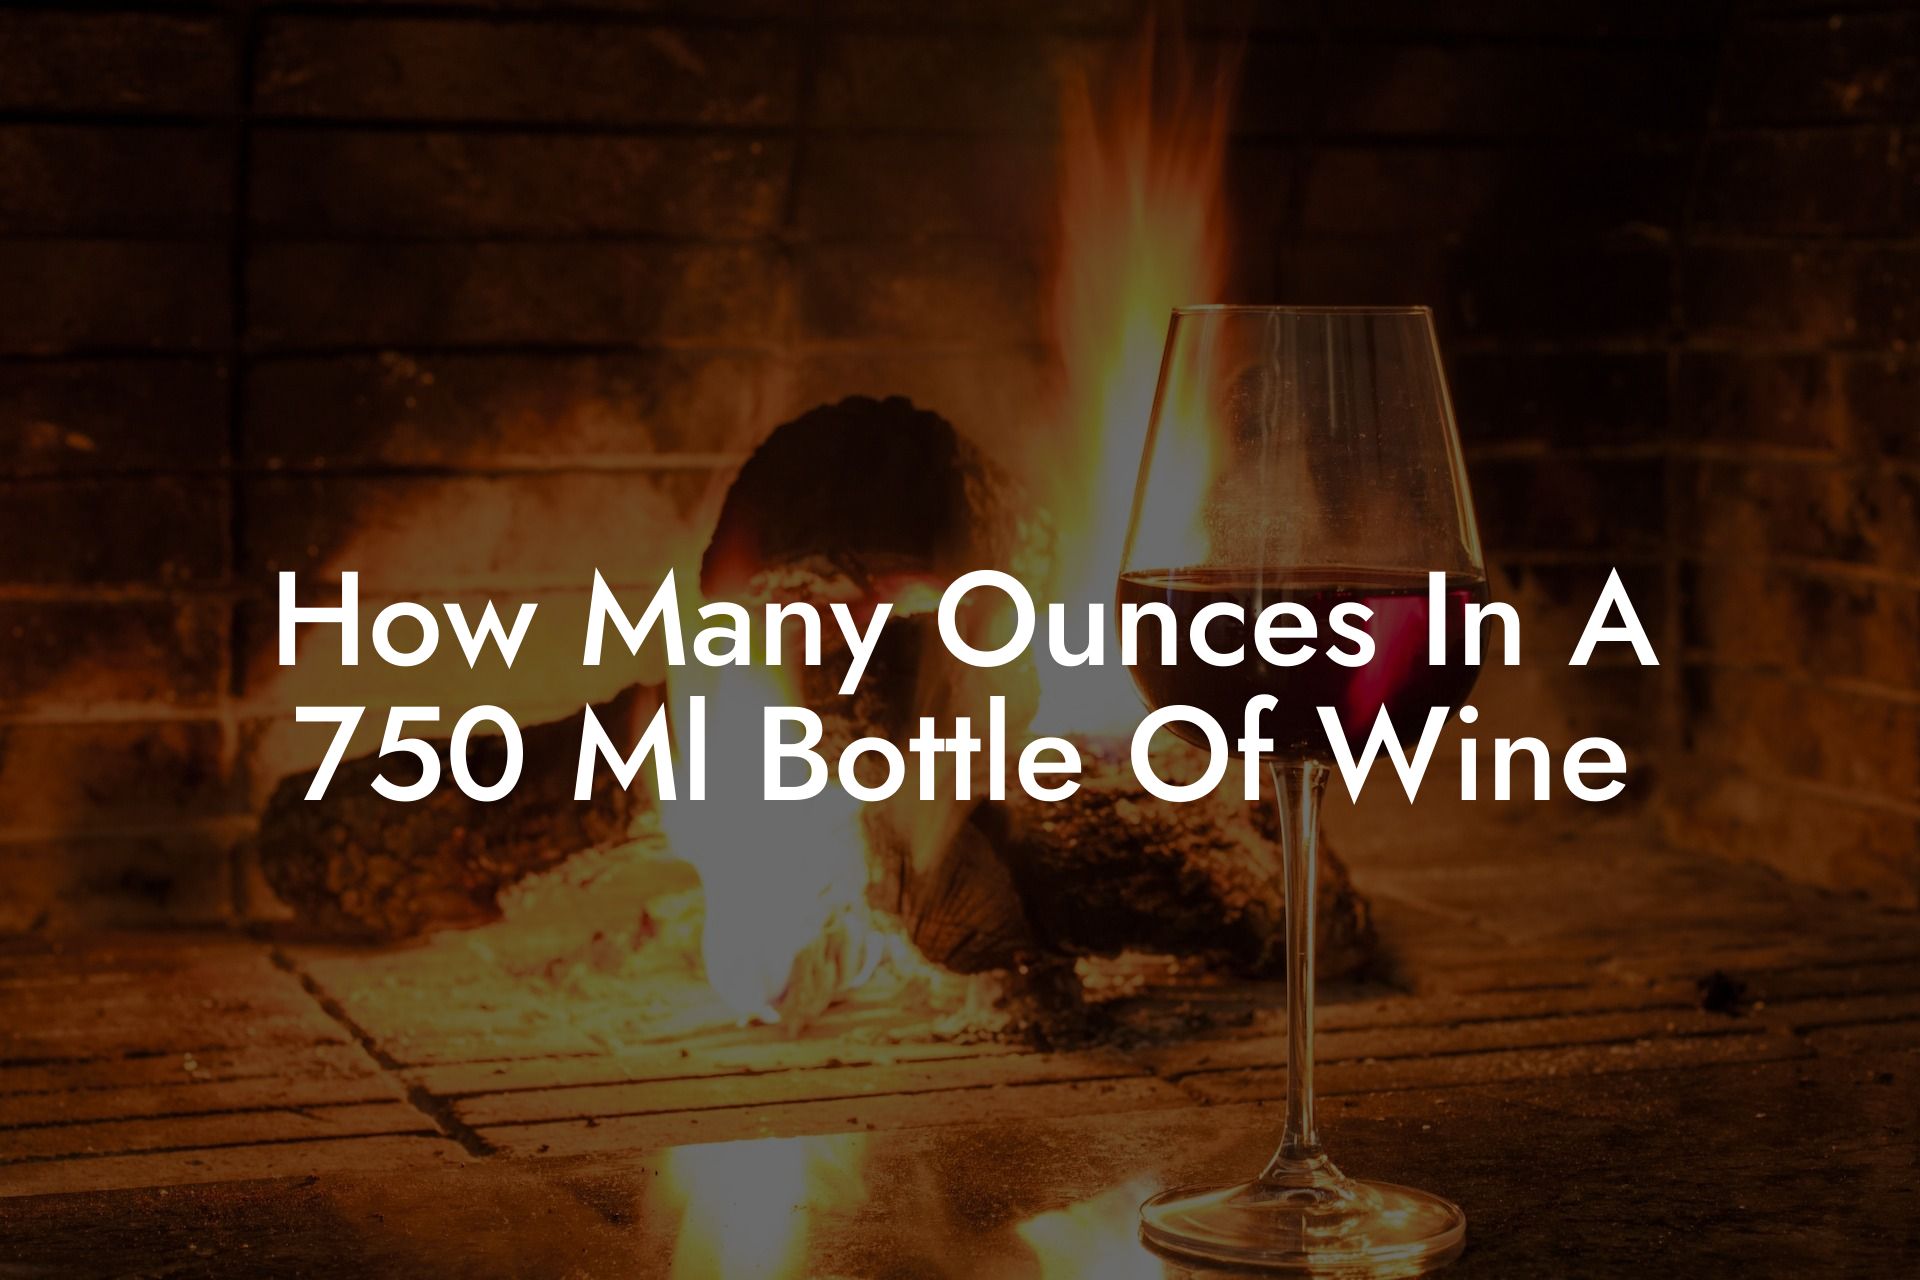 How Many Ounces In A 750 Ml Bottle Of Wine